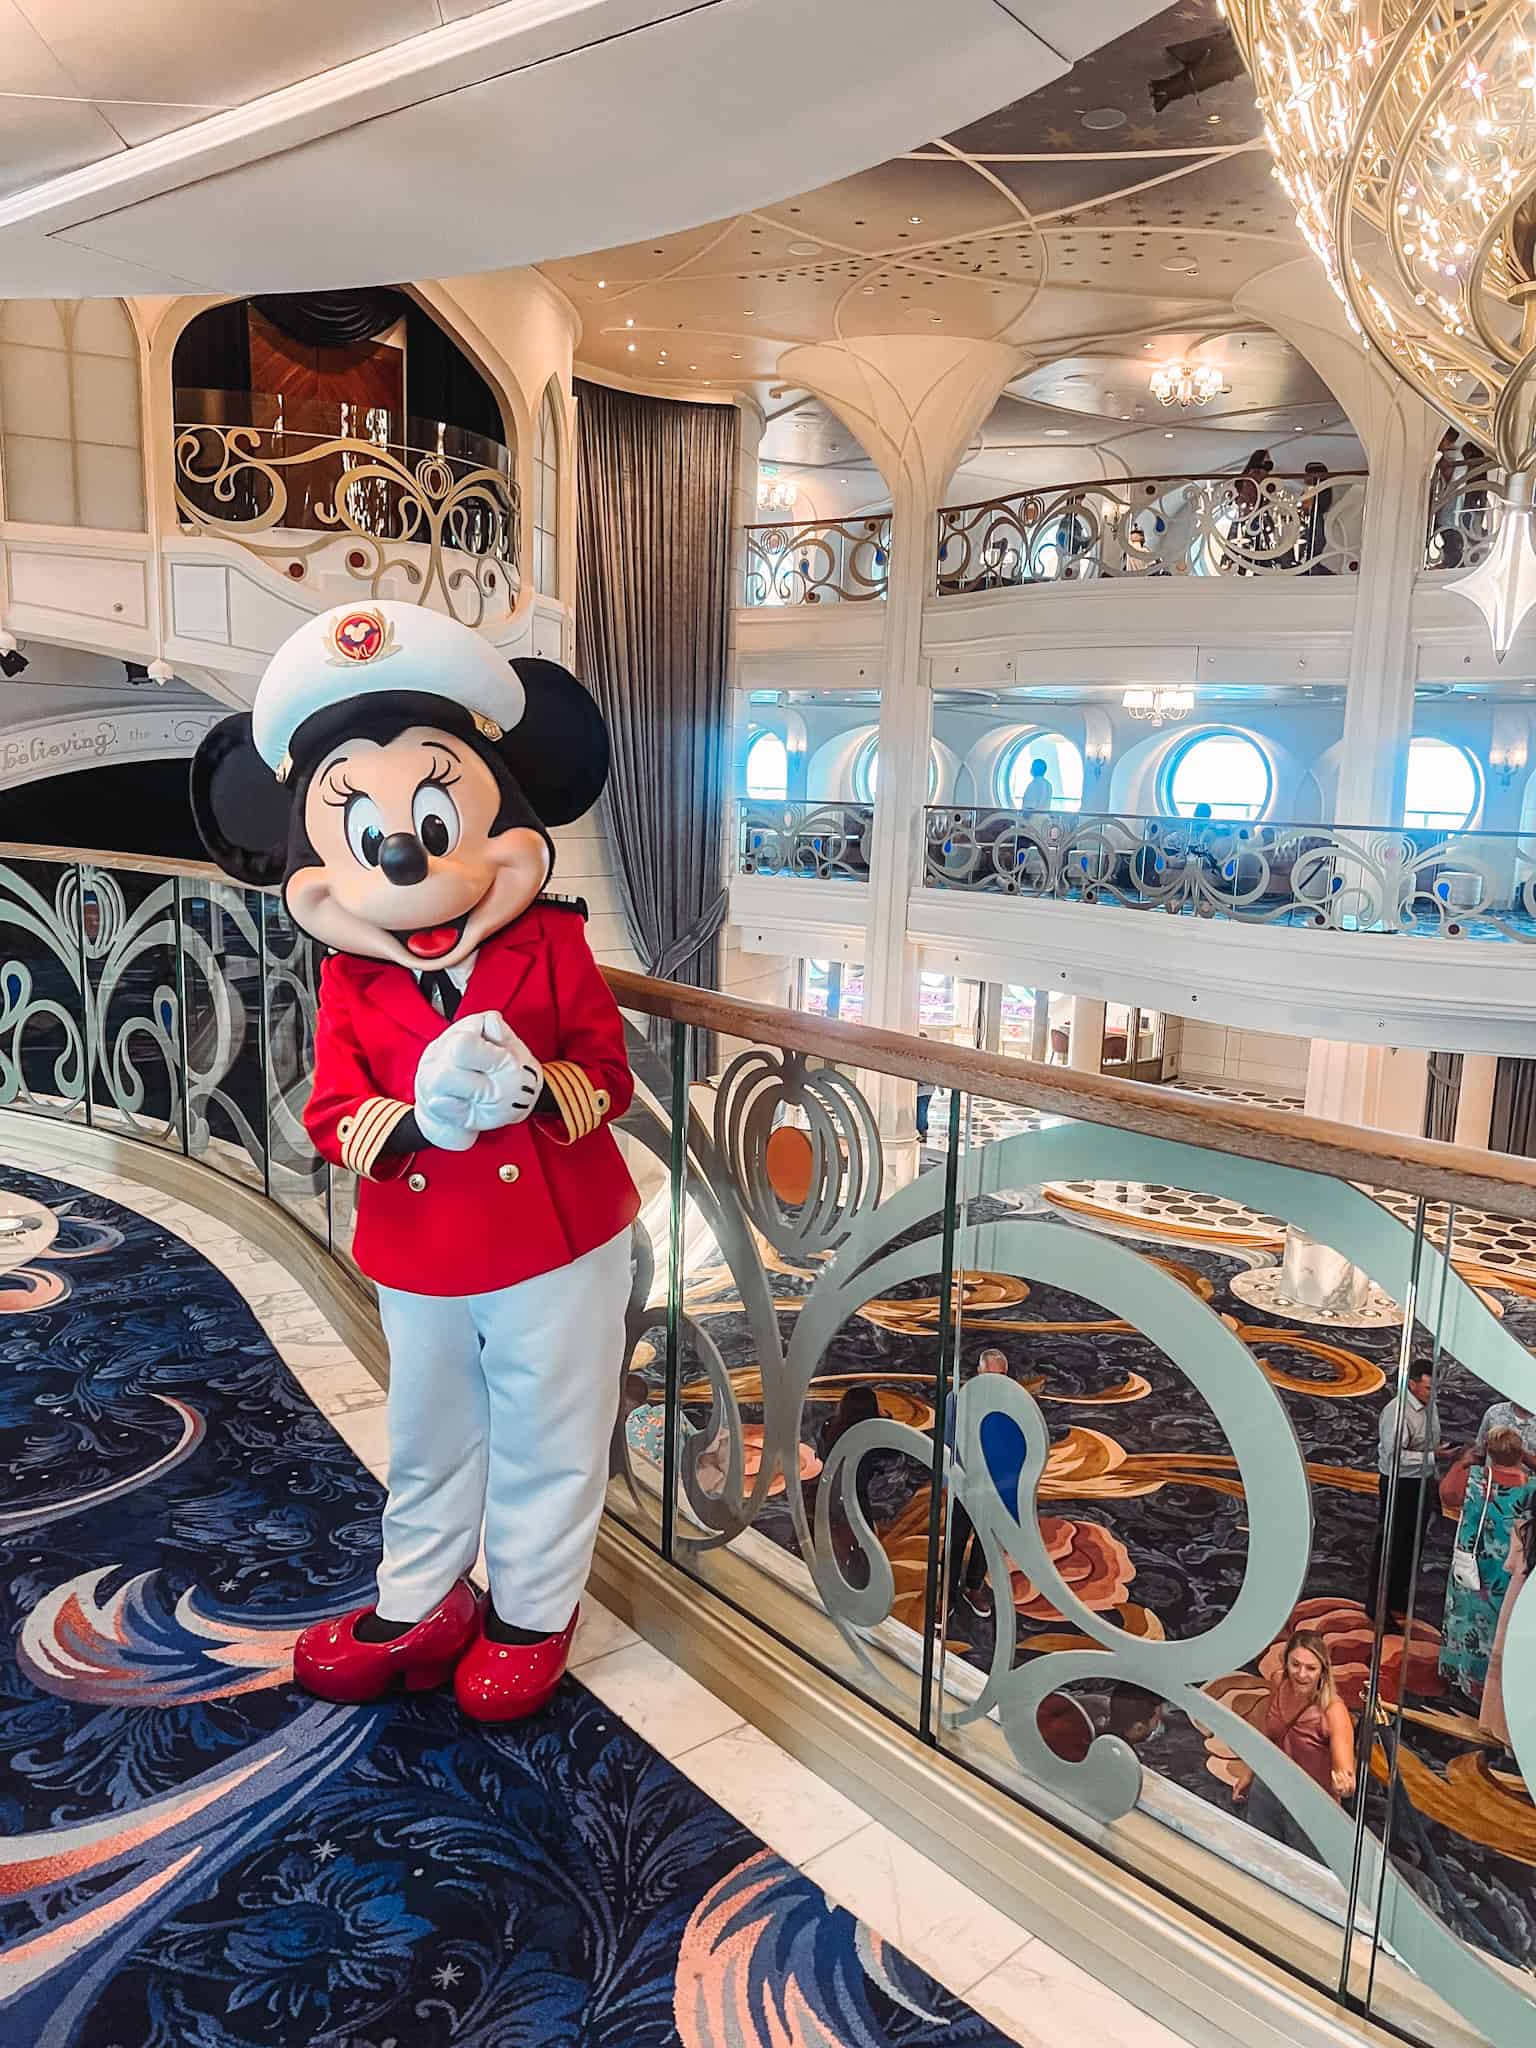 Planning to sail on the new Disney Wish cruise? Here are the best tips to enjoy everything on your next family vacation!